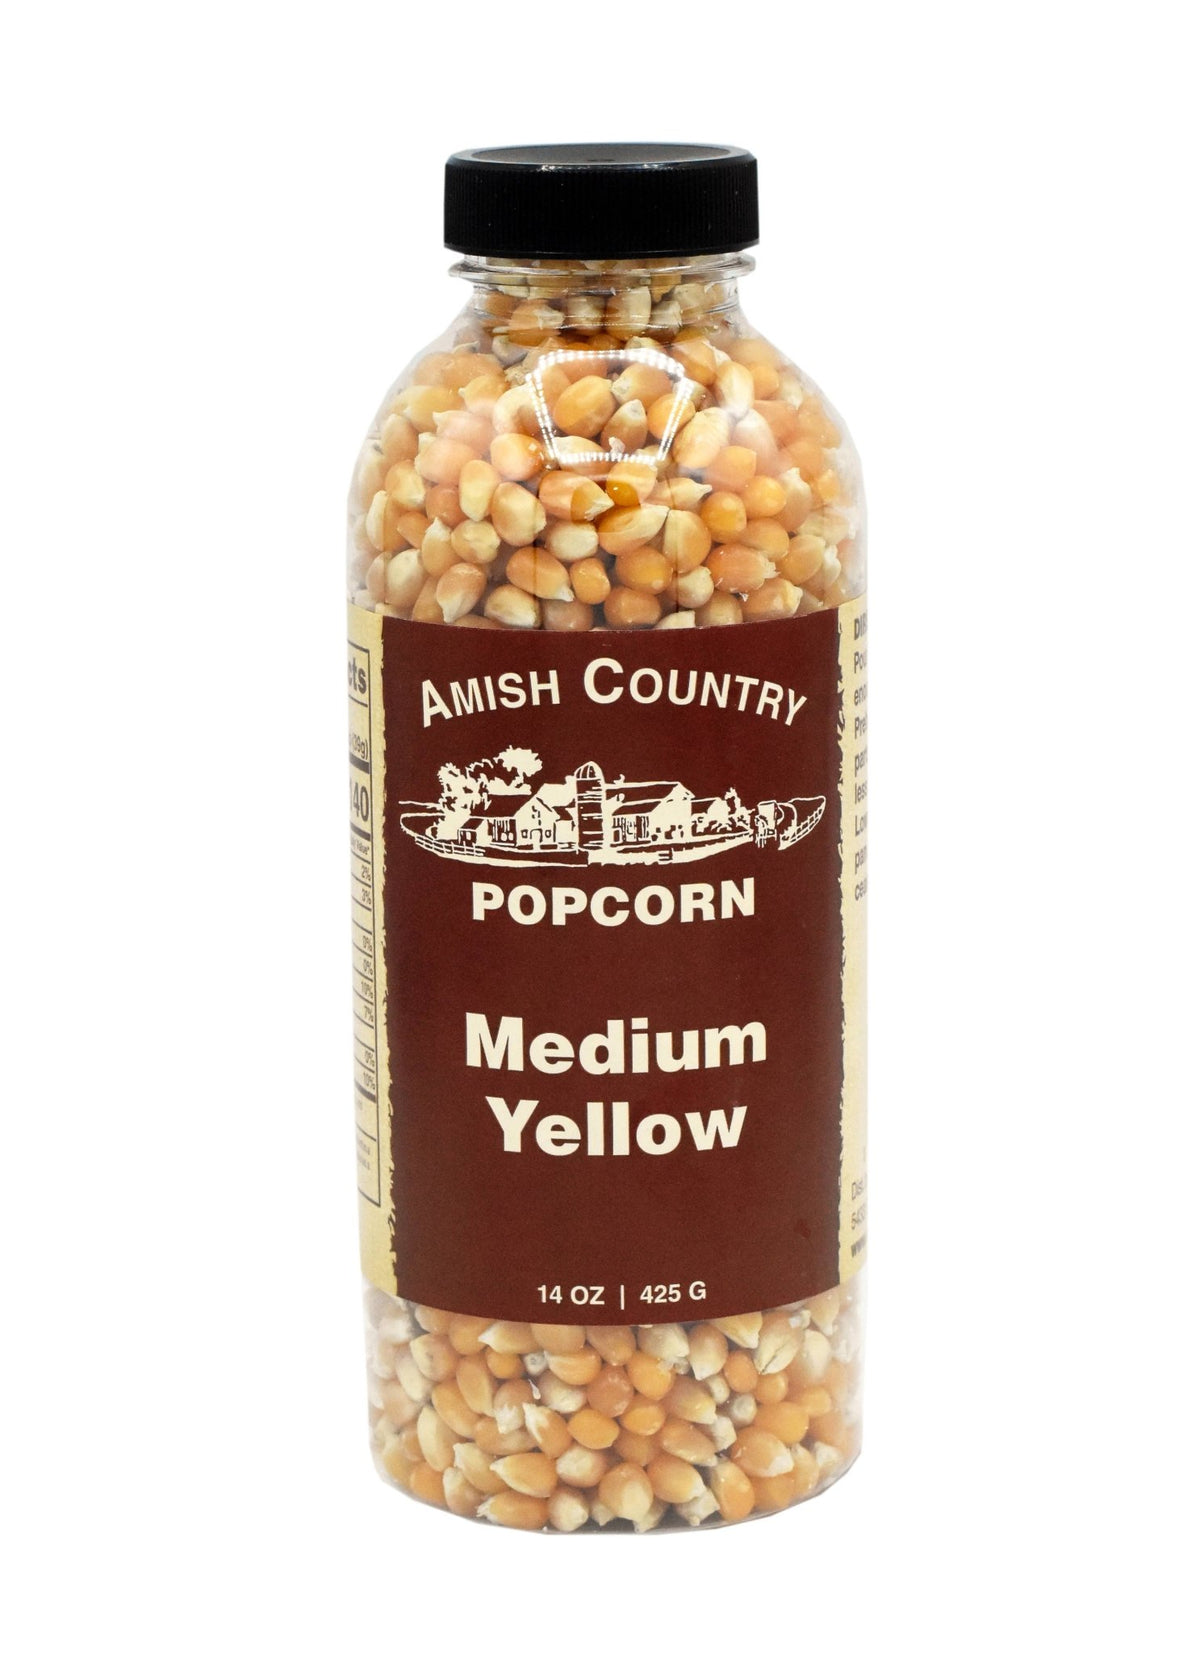 Amish Country Popcorn - 14oz Bottle of Medium Yellow Popcorn - Pacific Flyway Supplies